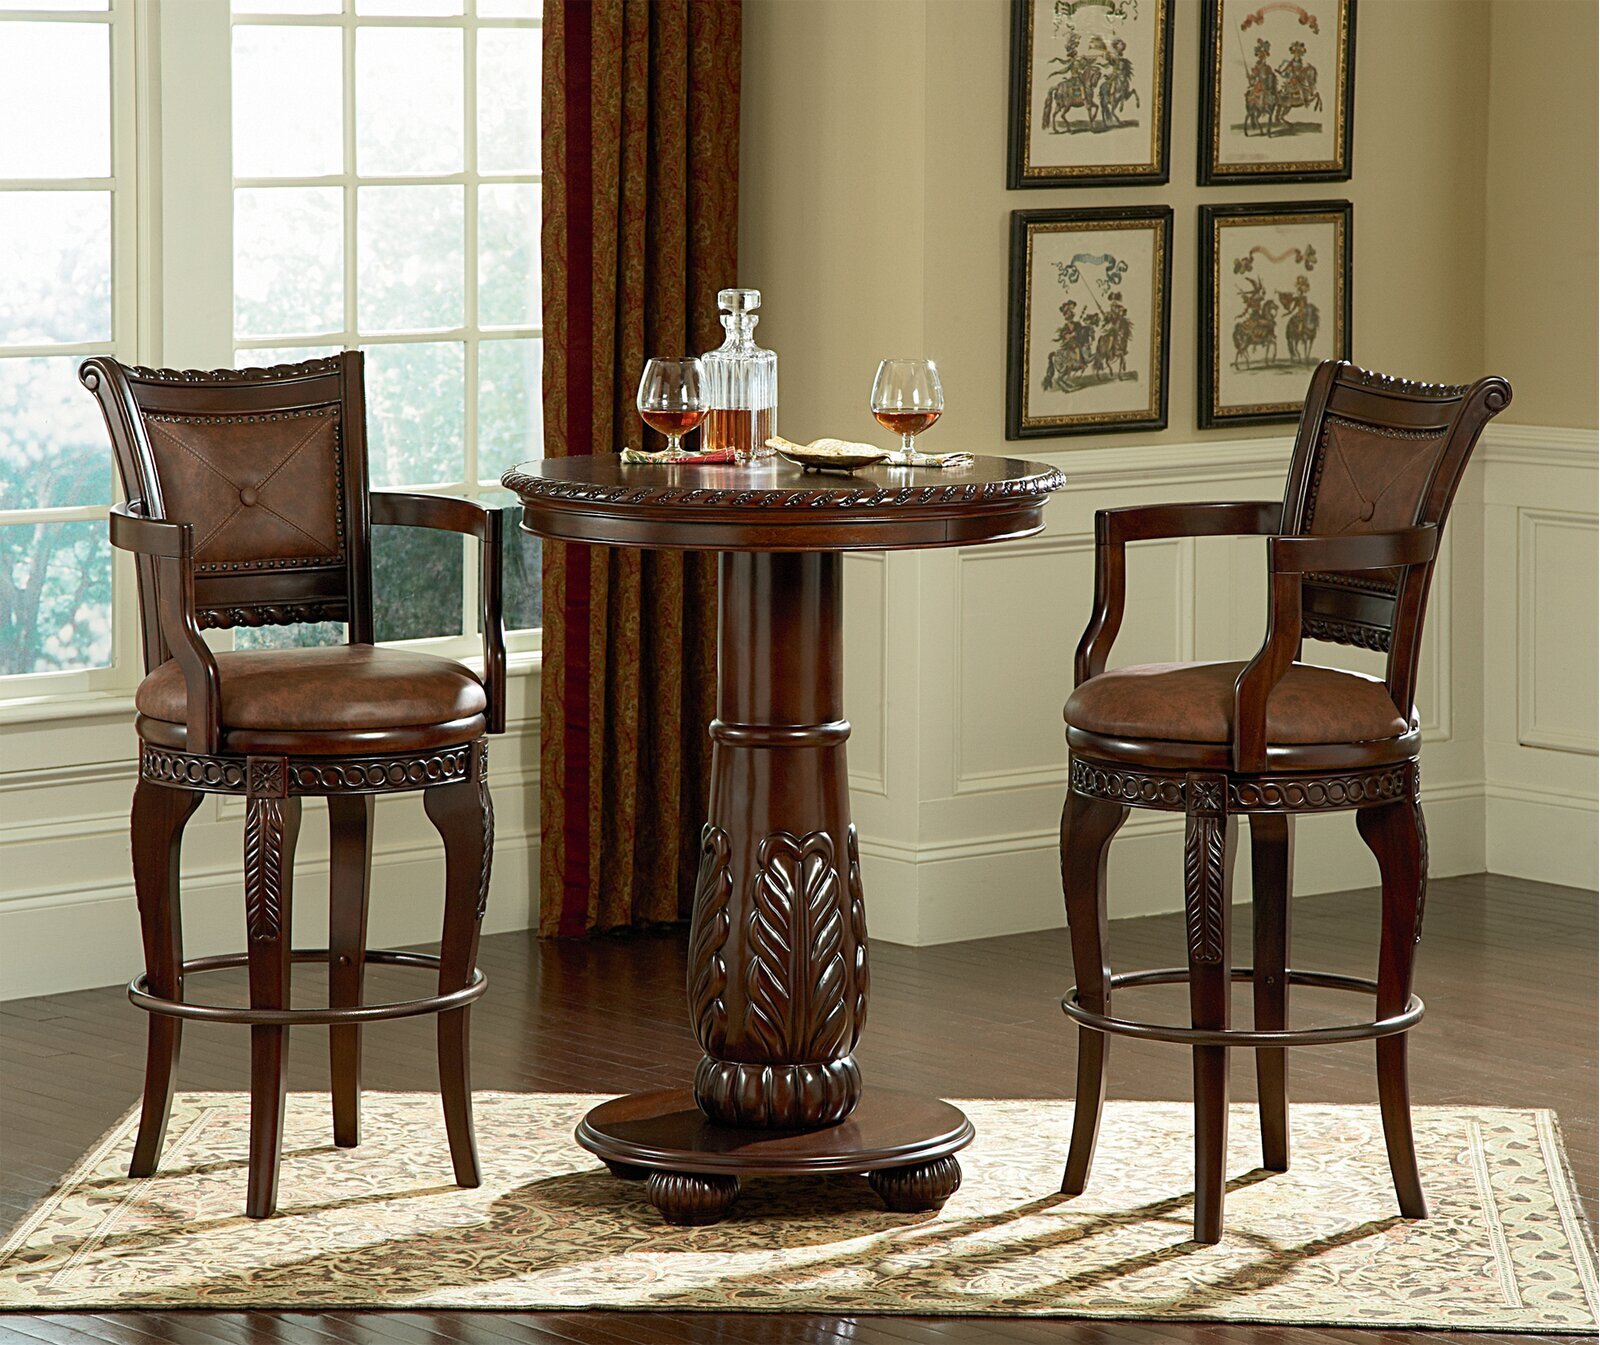 Solid Wood Pedestal Round Bar Table and Luxury Fullback Chairs with Armrests